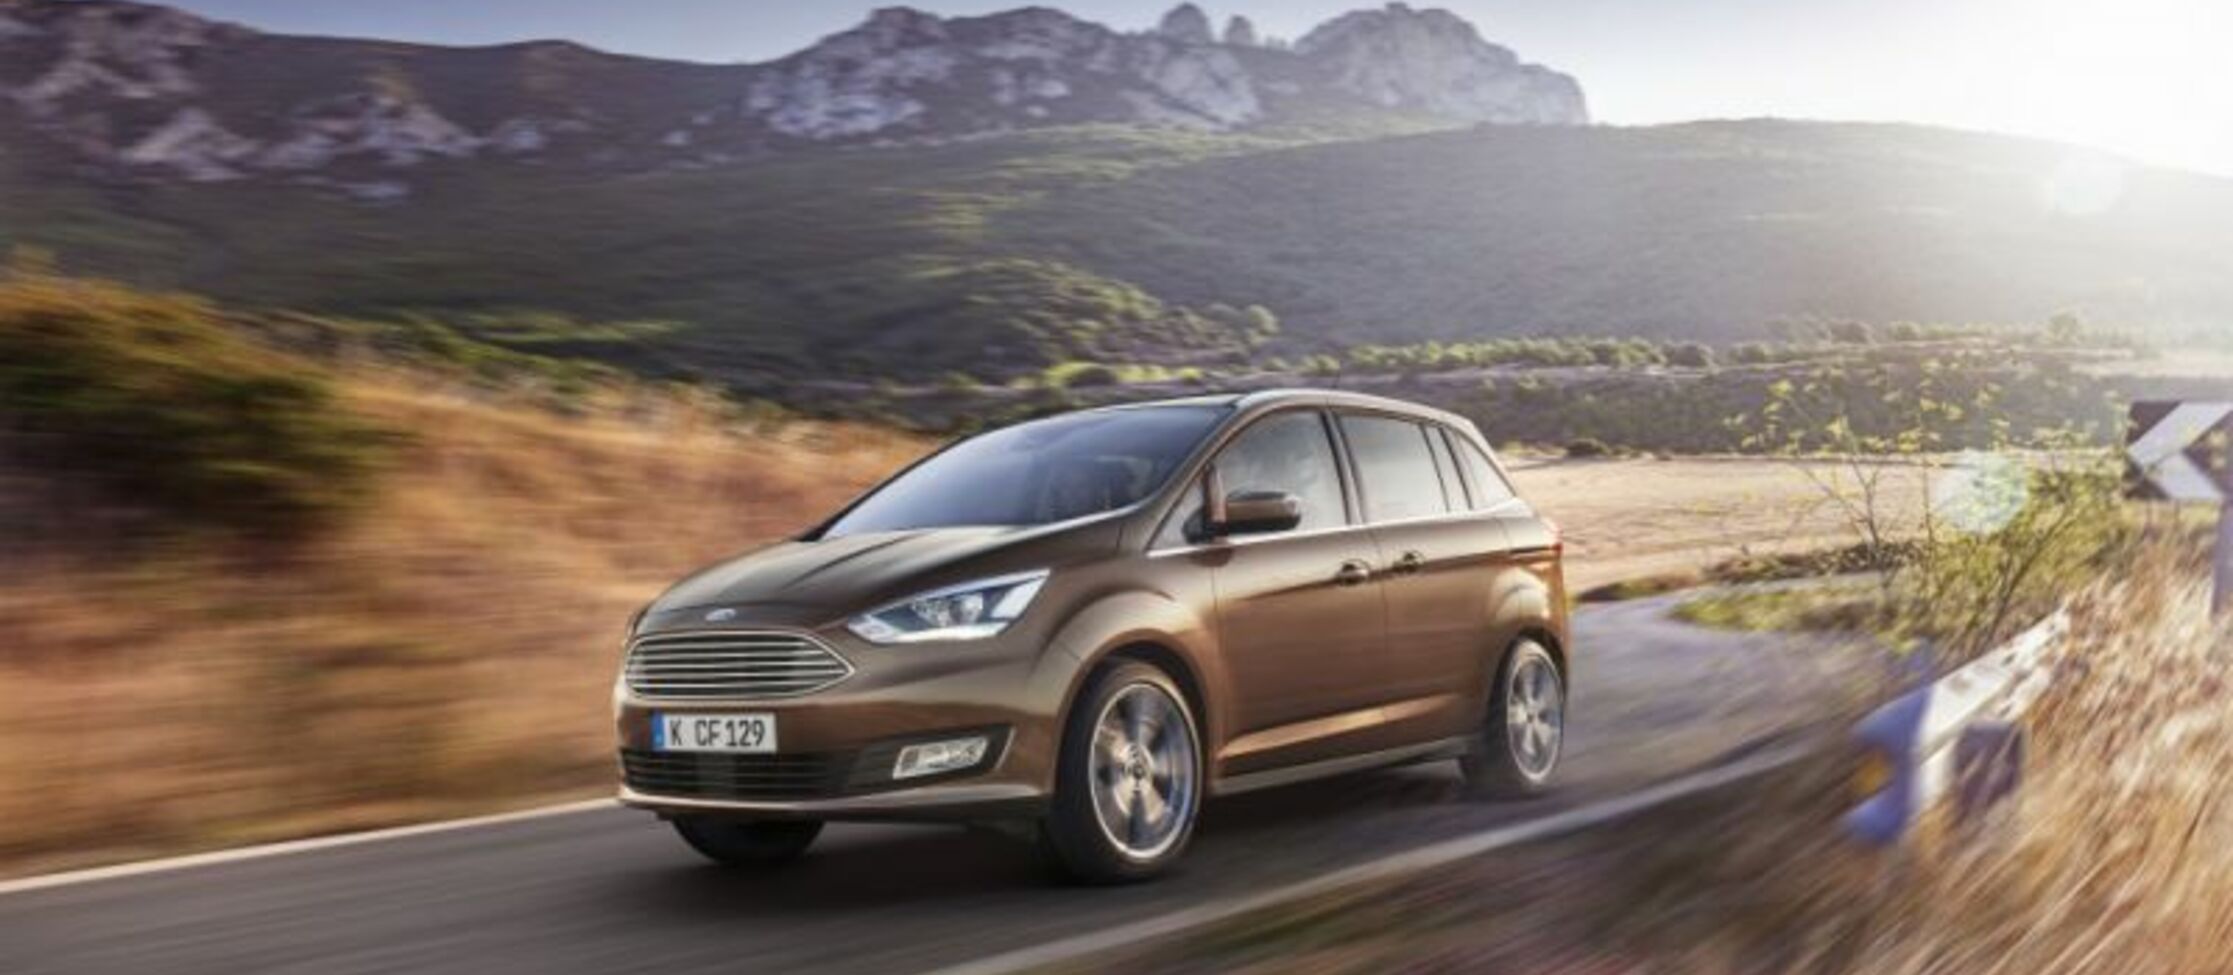 Ford Grand C-MAX (facelift 2015) 1.5 EcoBoost (150 Hp) PowerShift S&S 2015, 2016, 2017, 2018, 2019, 2020, 2021